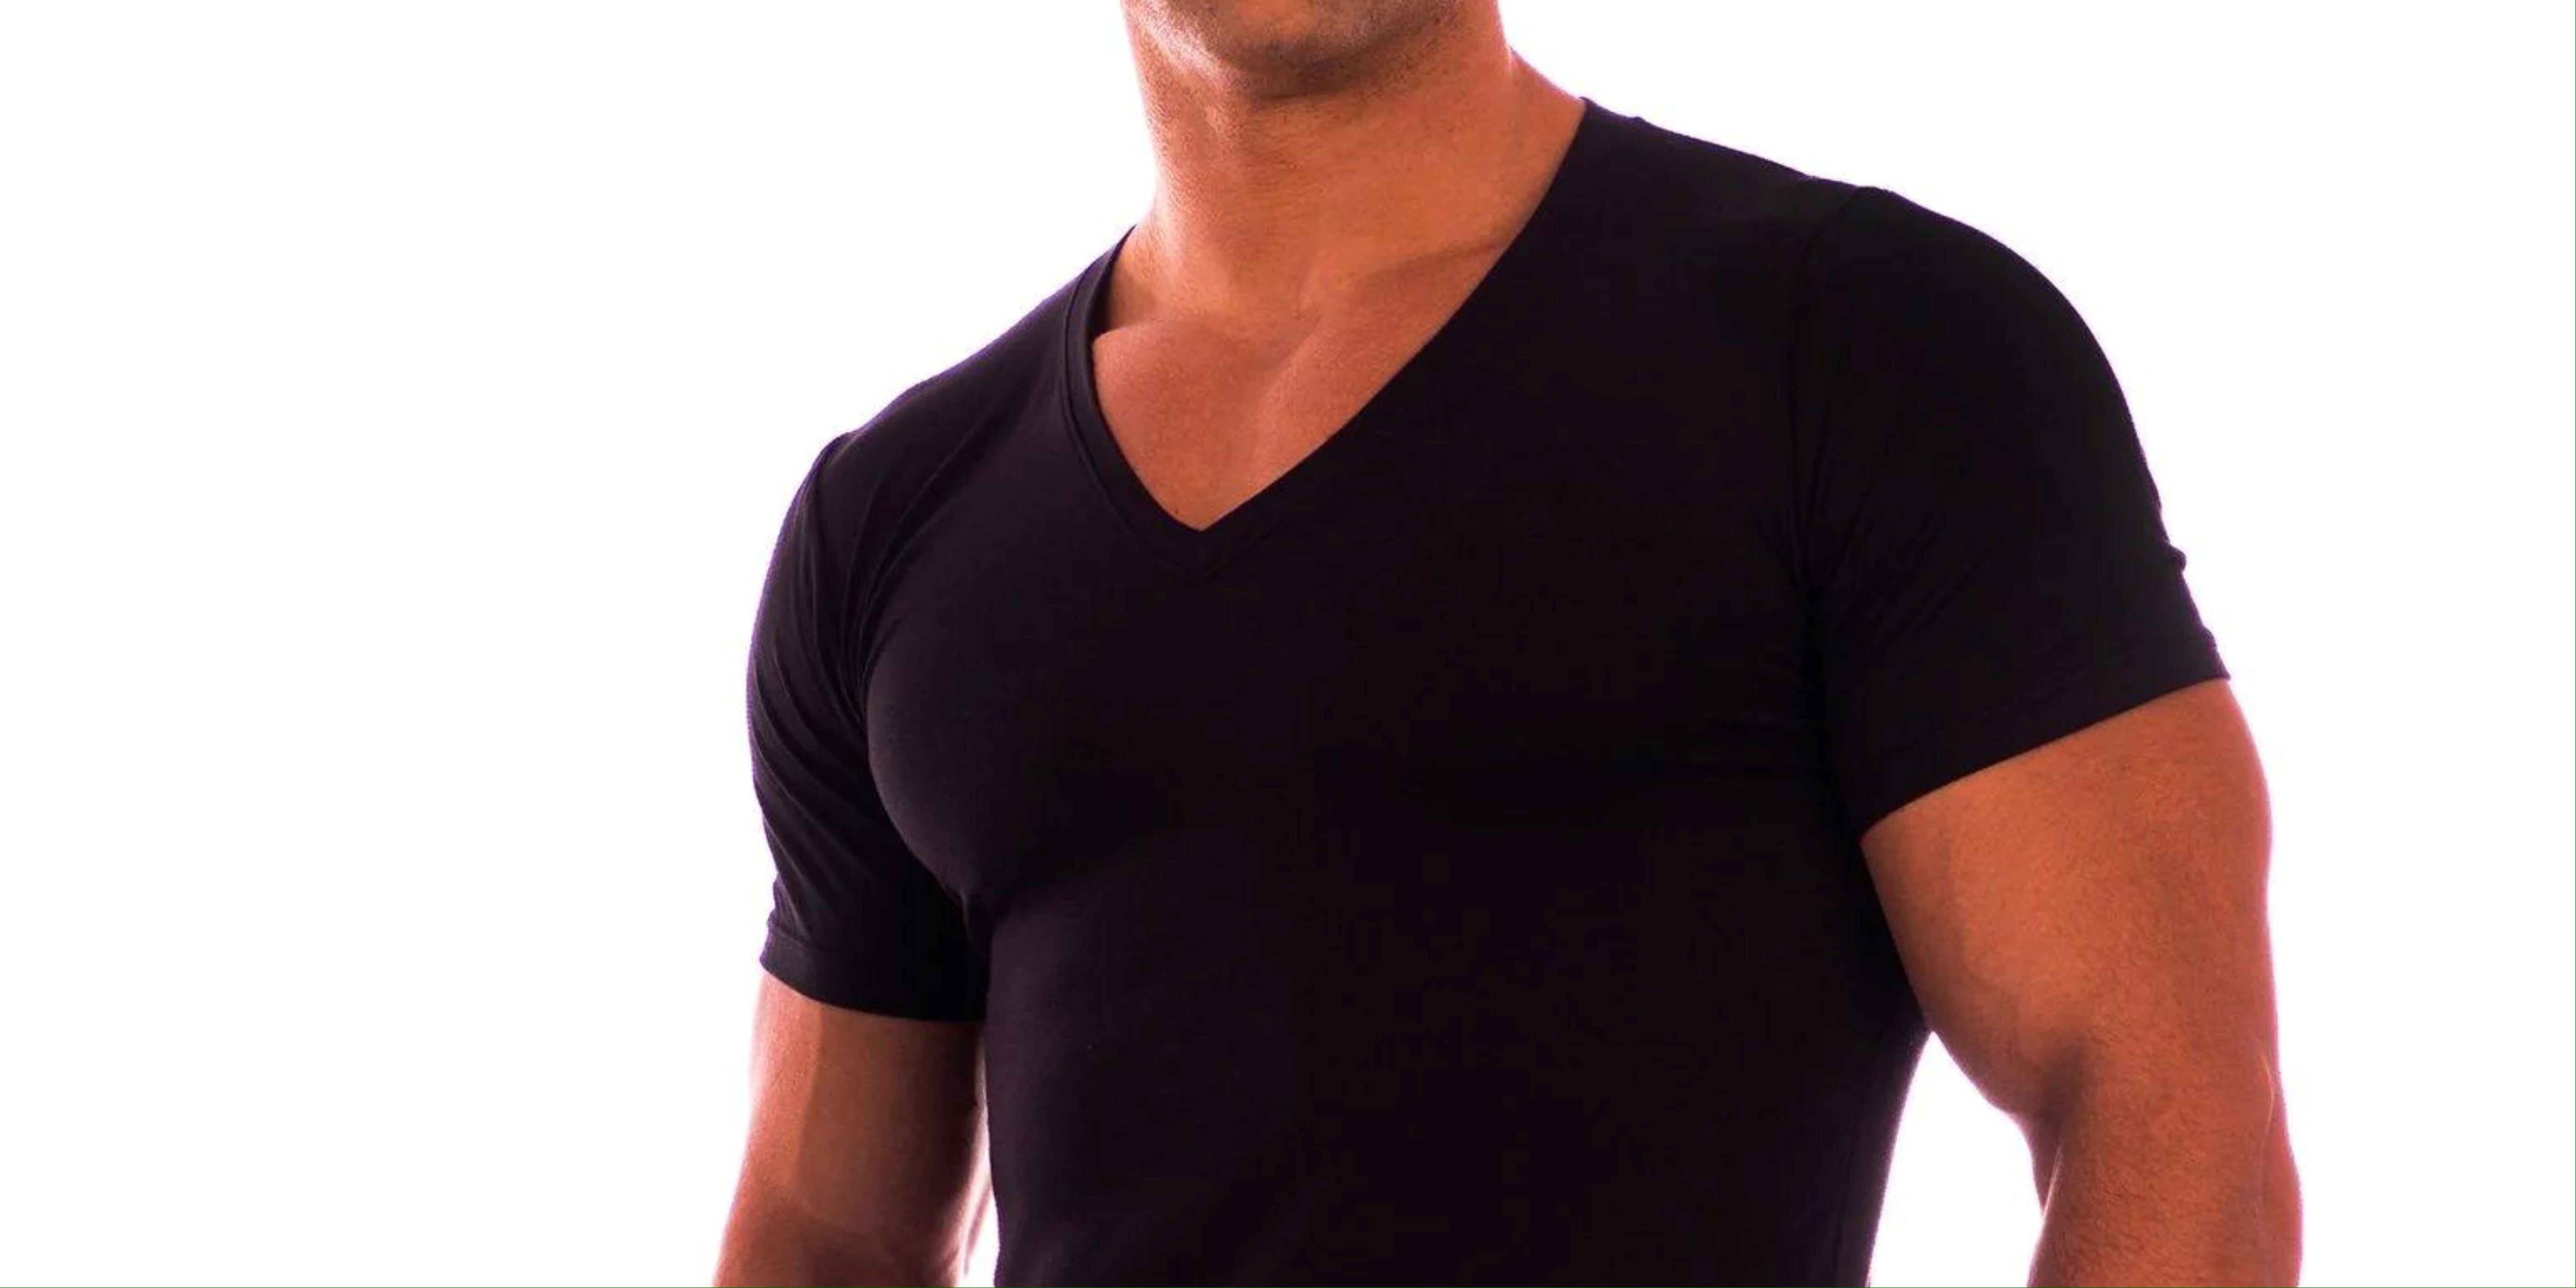 V Neck vs Deep V Neck: What’s The Difference?